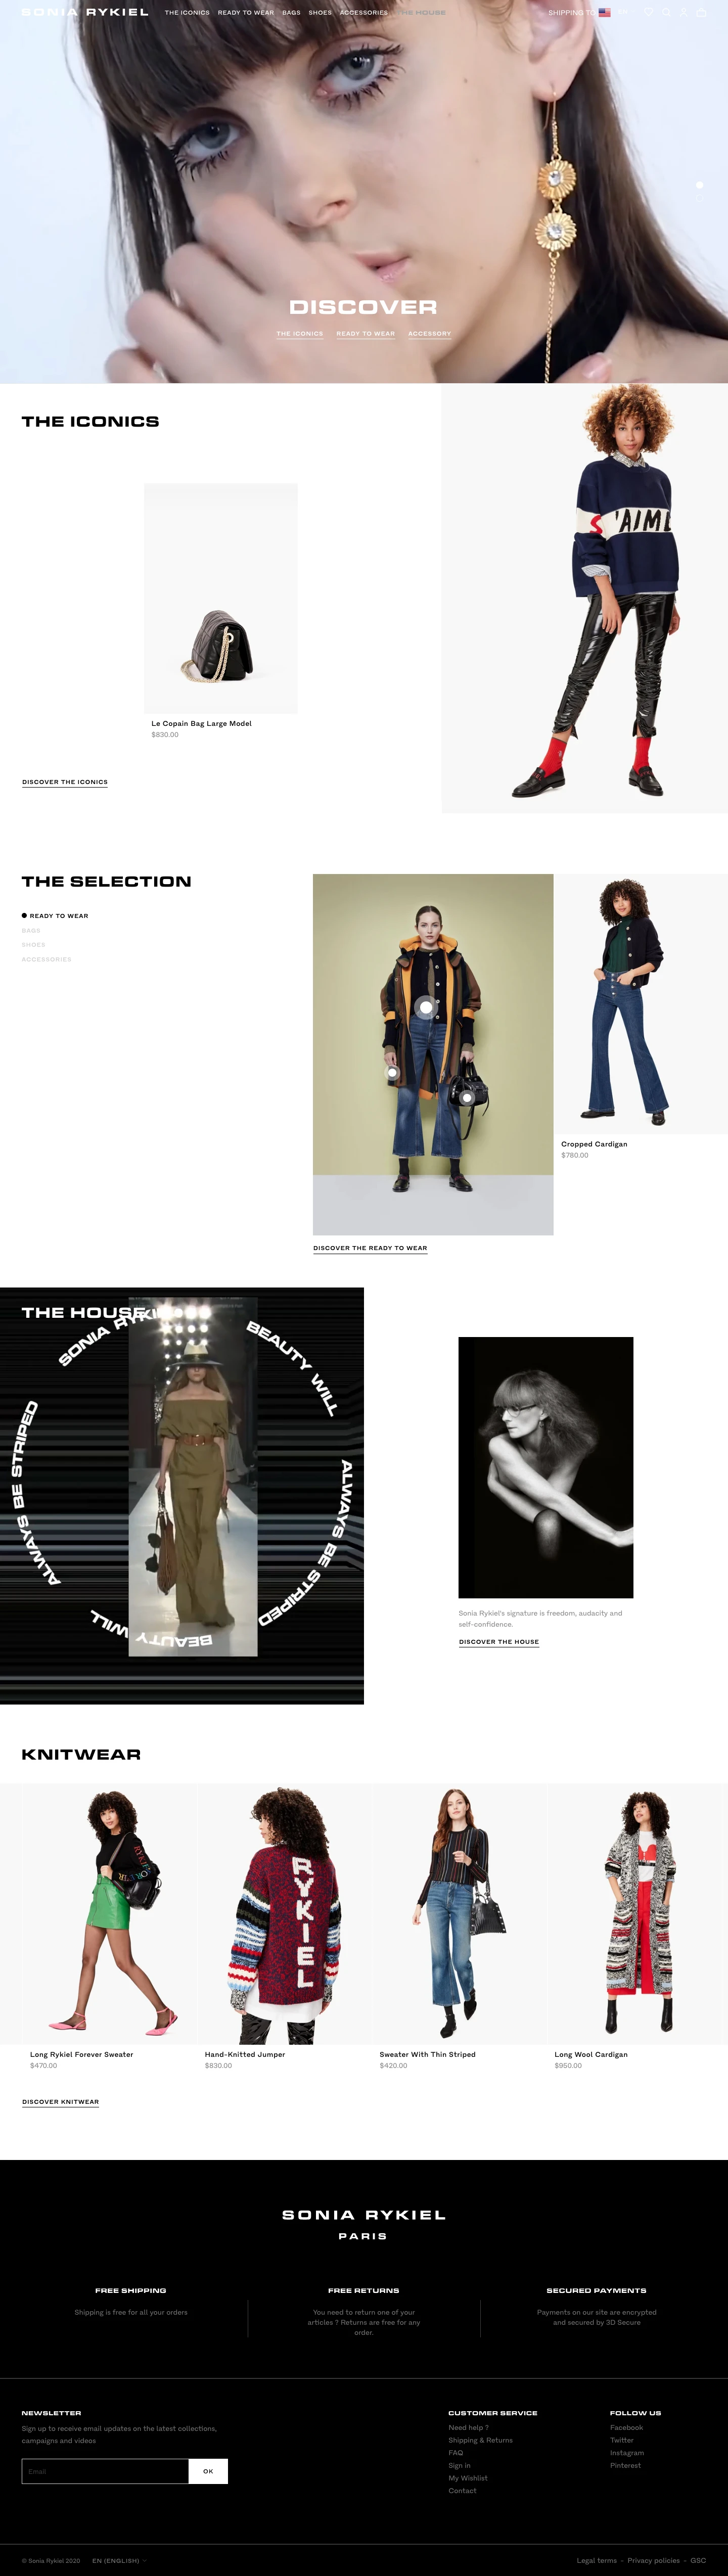 Sonia Rykiel Landing Page Example: A new chapter has begun.